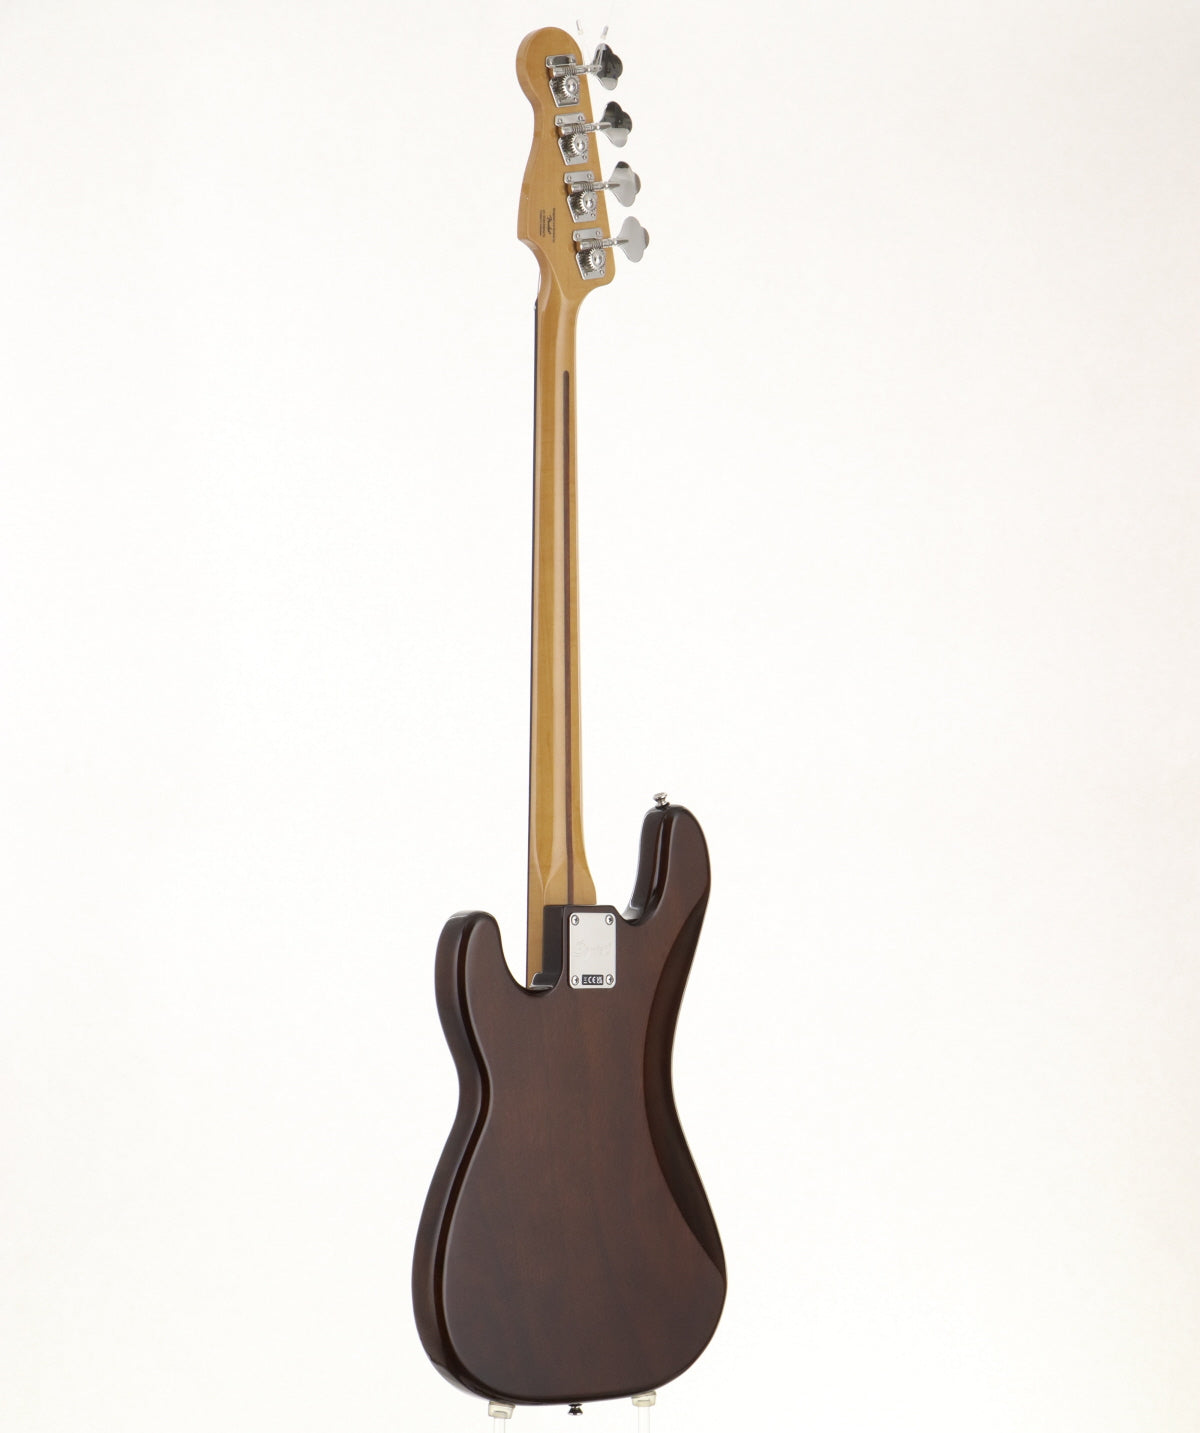 [SN ISSB23003675] USED Squier / Classic Vibe 70s Precision Bass Walnut [03]